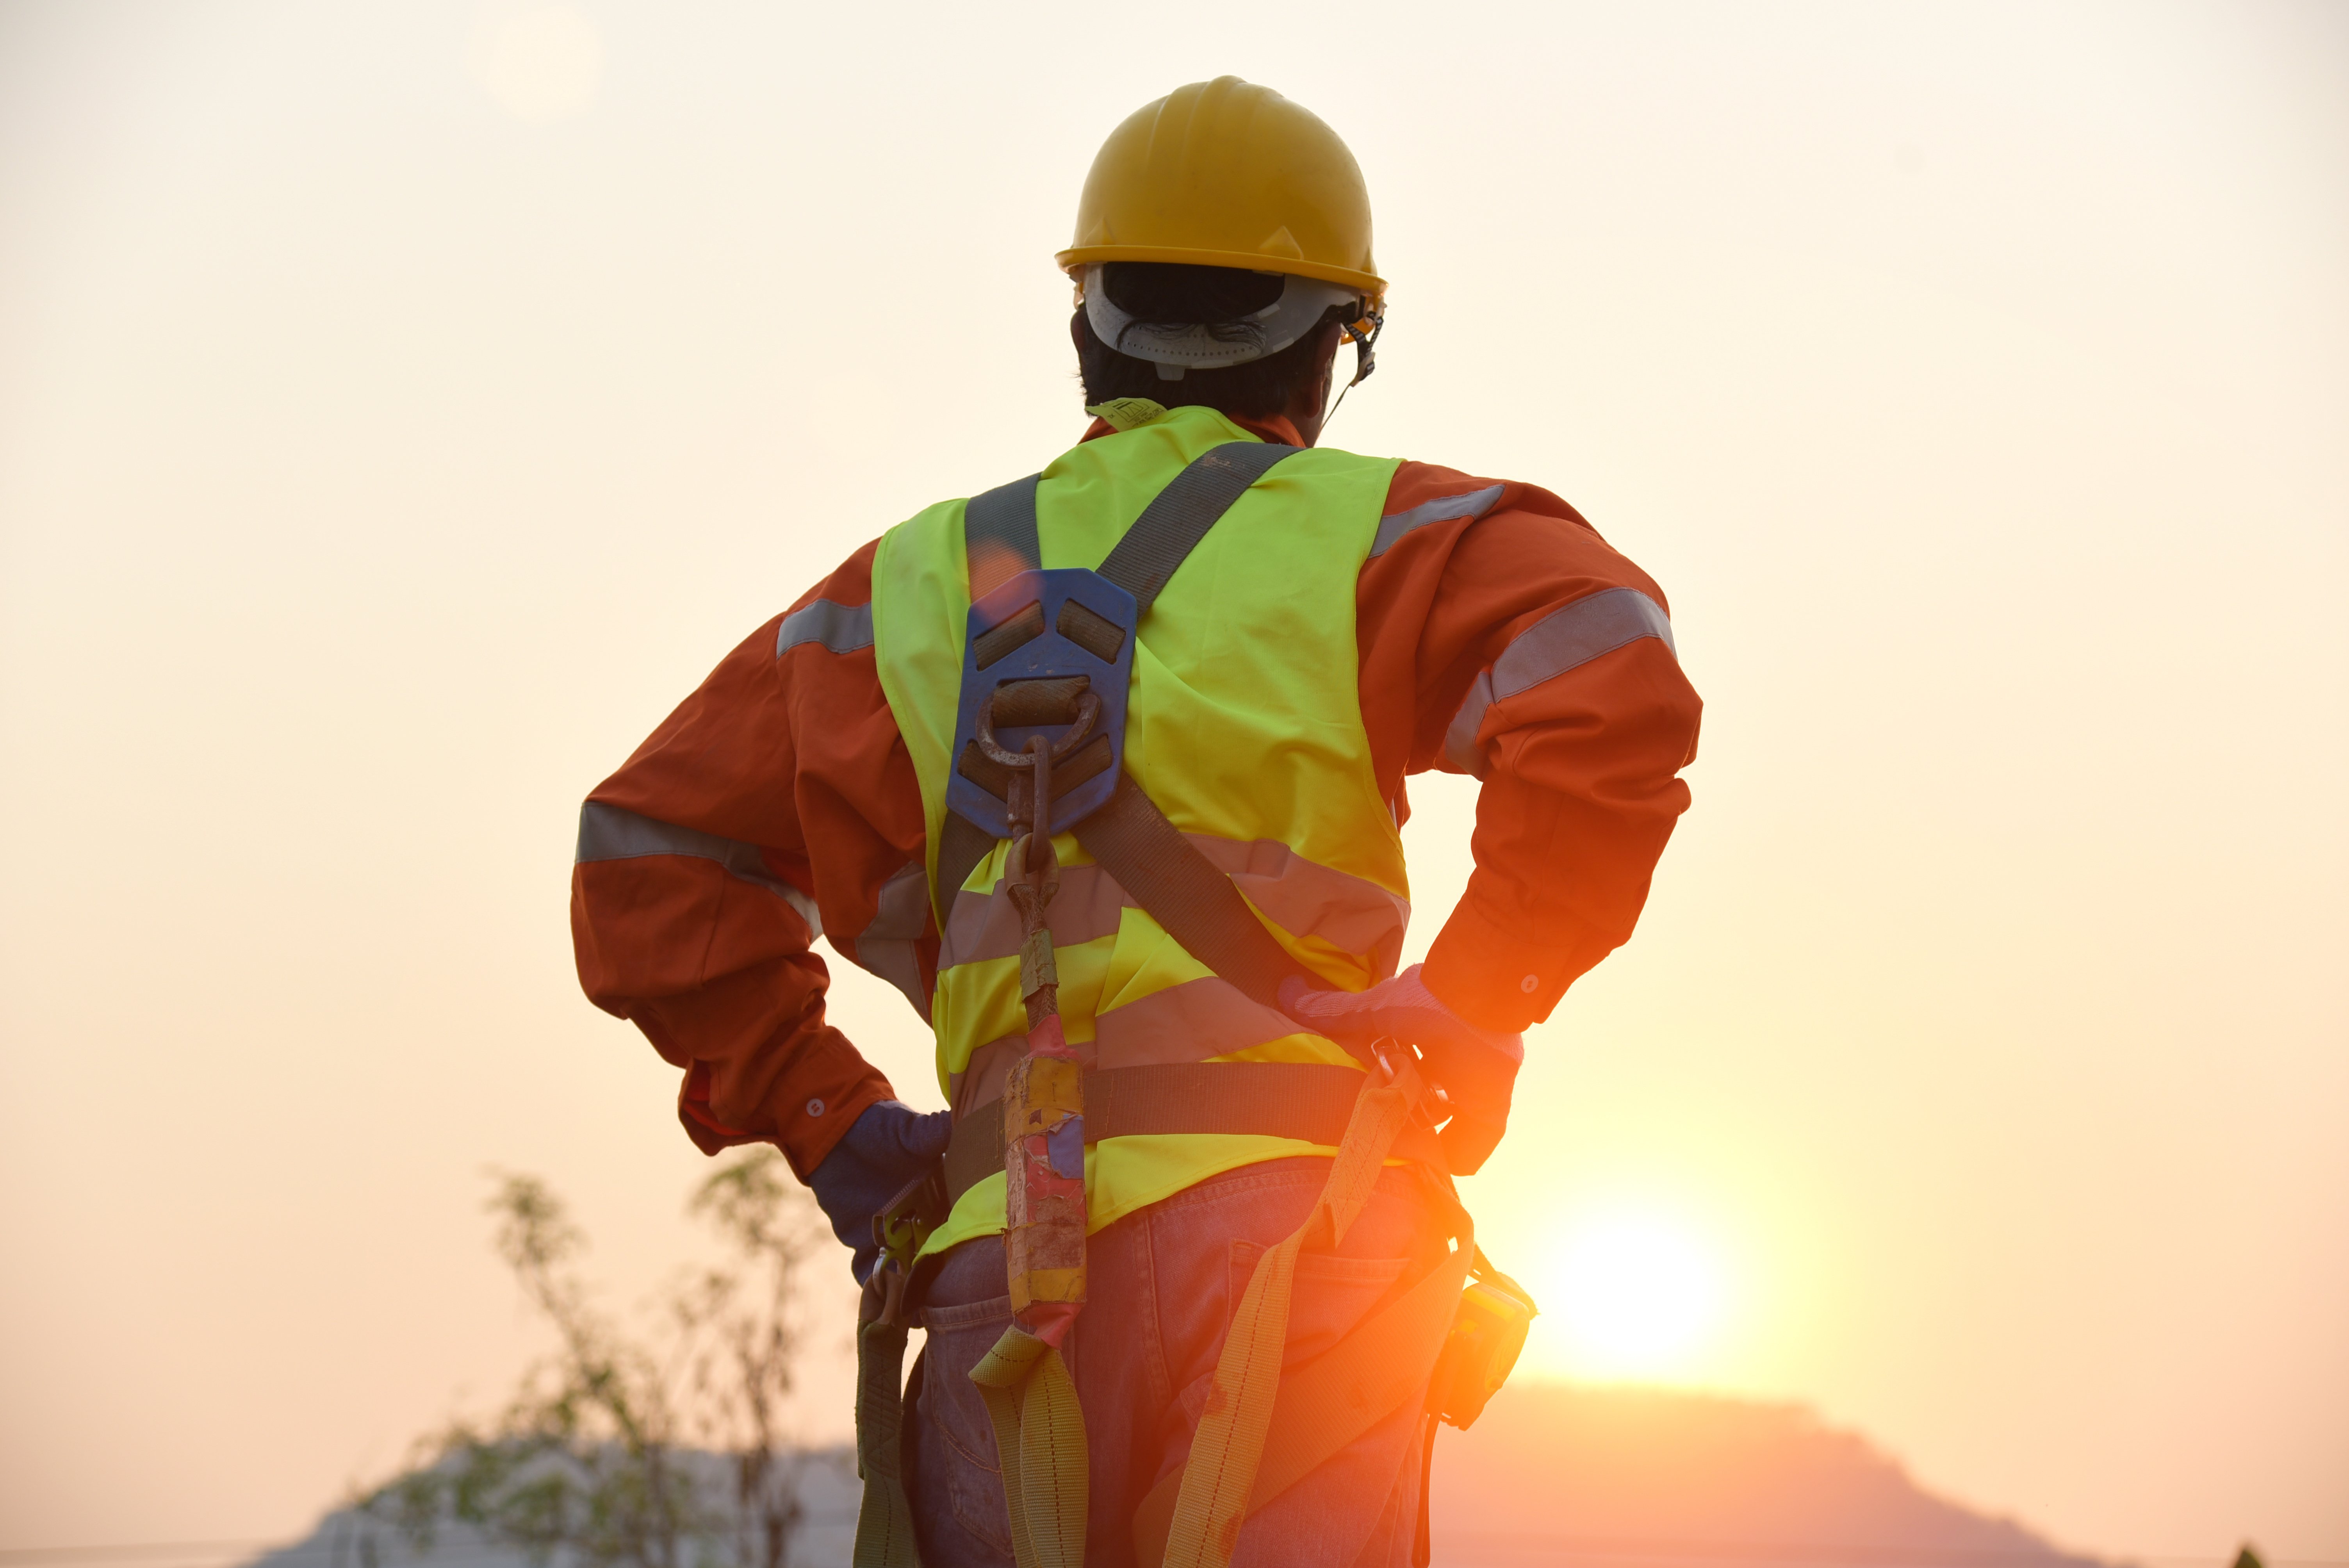 Person wearing a harness, orange jumpsuit, and yellow construction hat looking at the sunset outside